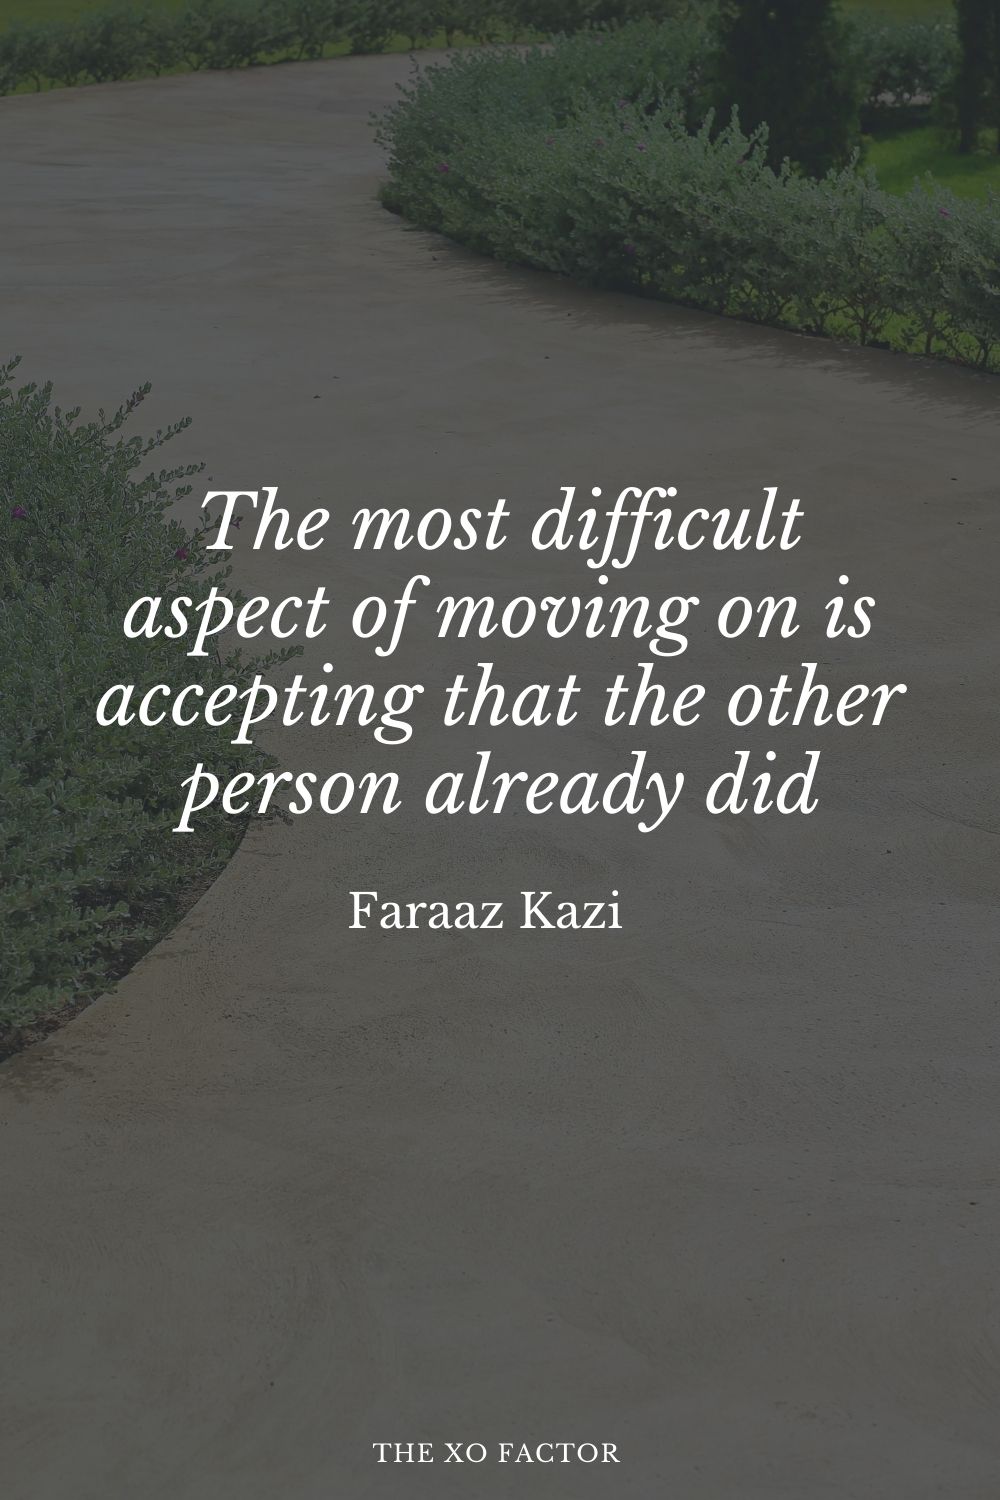 The most difficult aspect of moving on is accepting that the other person already did.” Faraaz Kazi